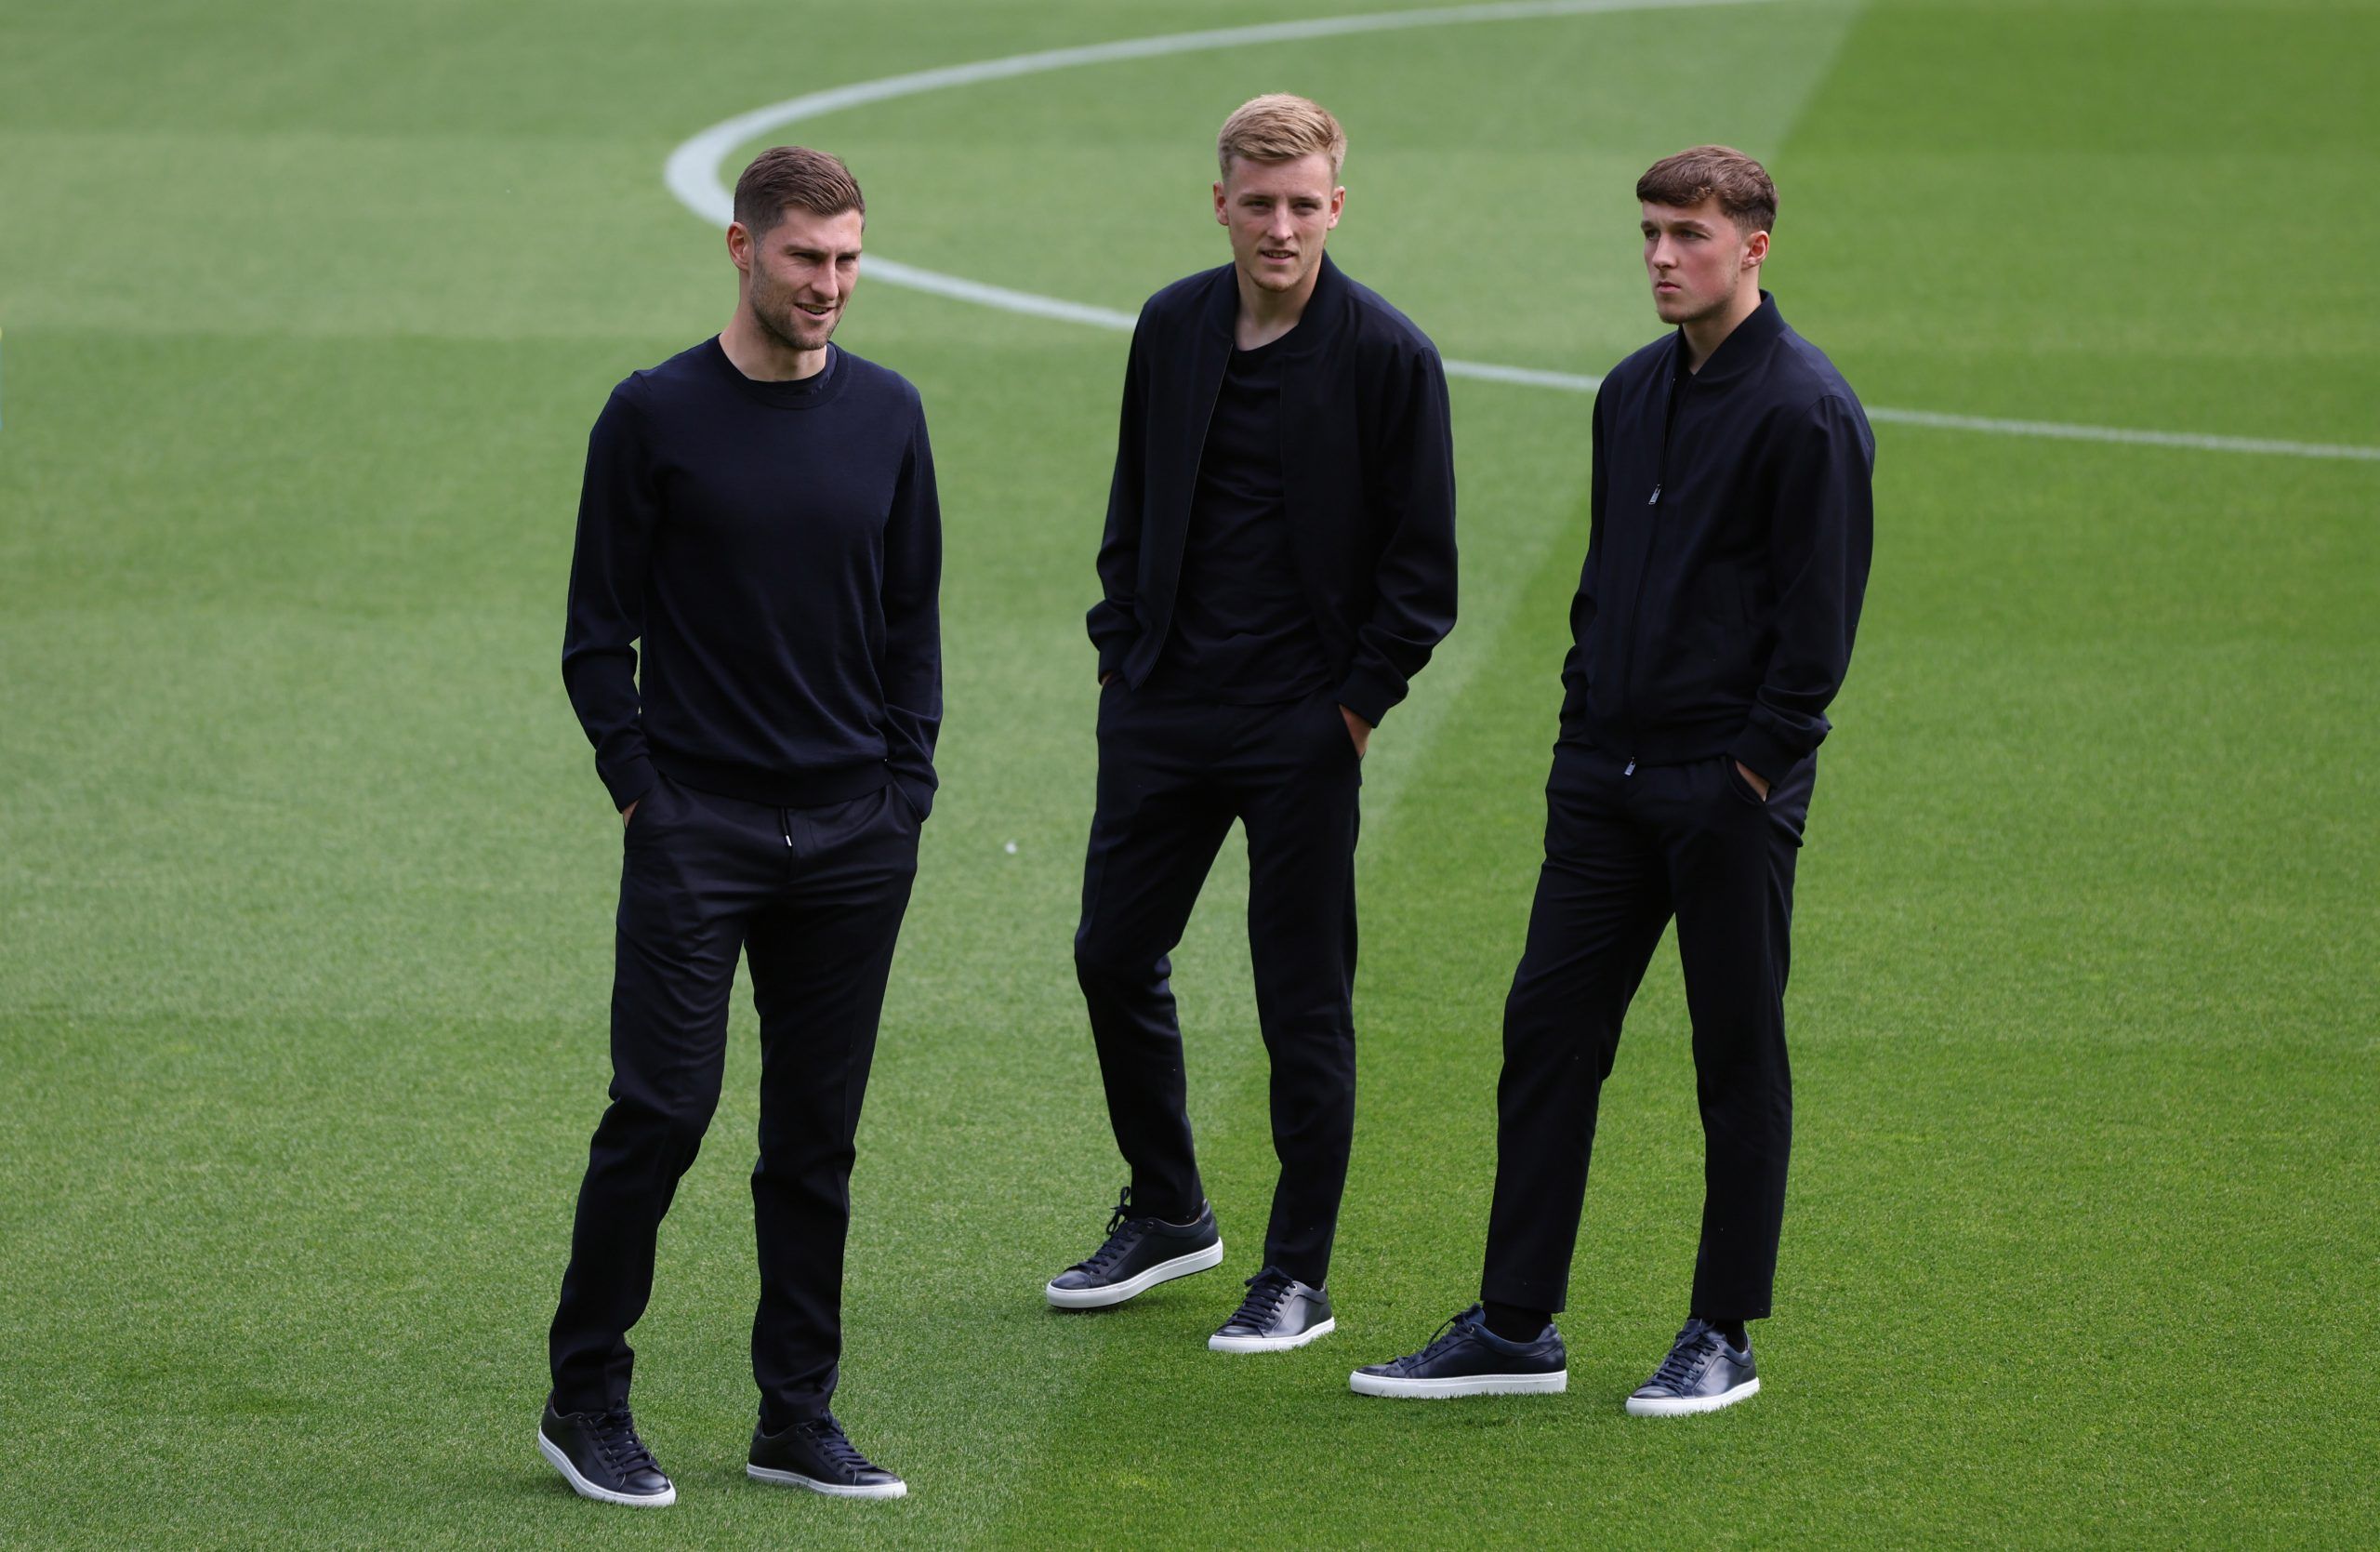 Tottenham Hotspur's Ben Davies, Harvey White and Alfie Devine on the pitch ahead of the match vs Norwich City